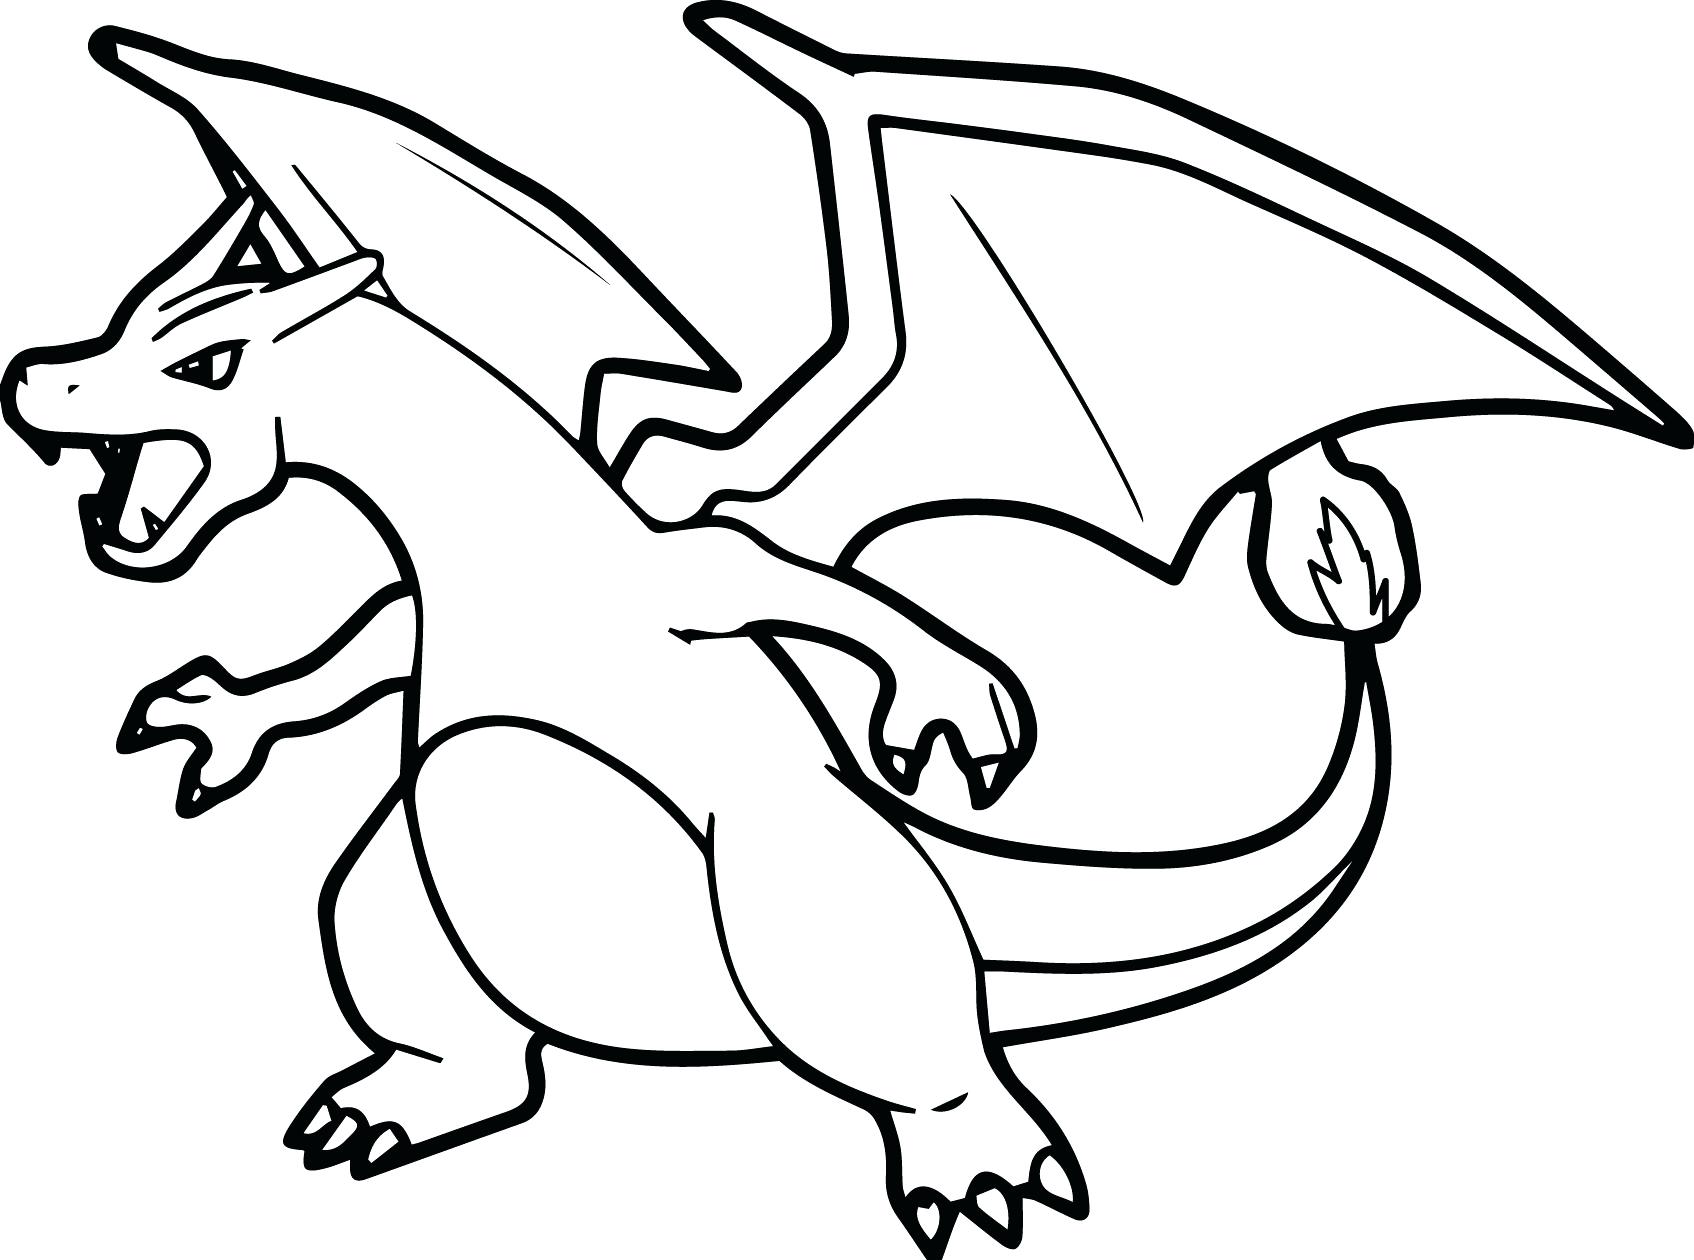 Pokemon Mega Charizard X Coloring Pages at GetColorings.com | Free